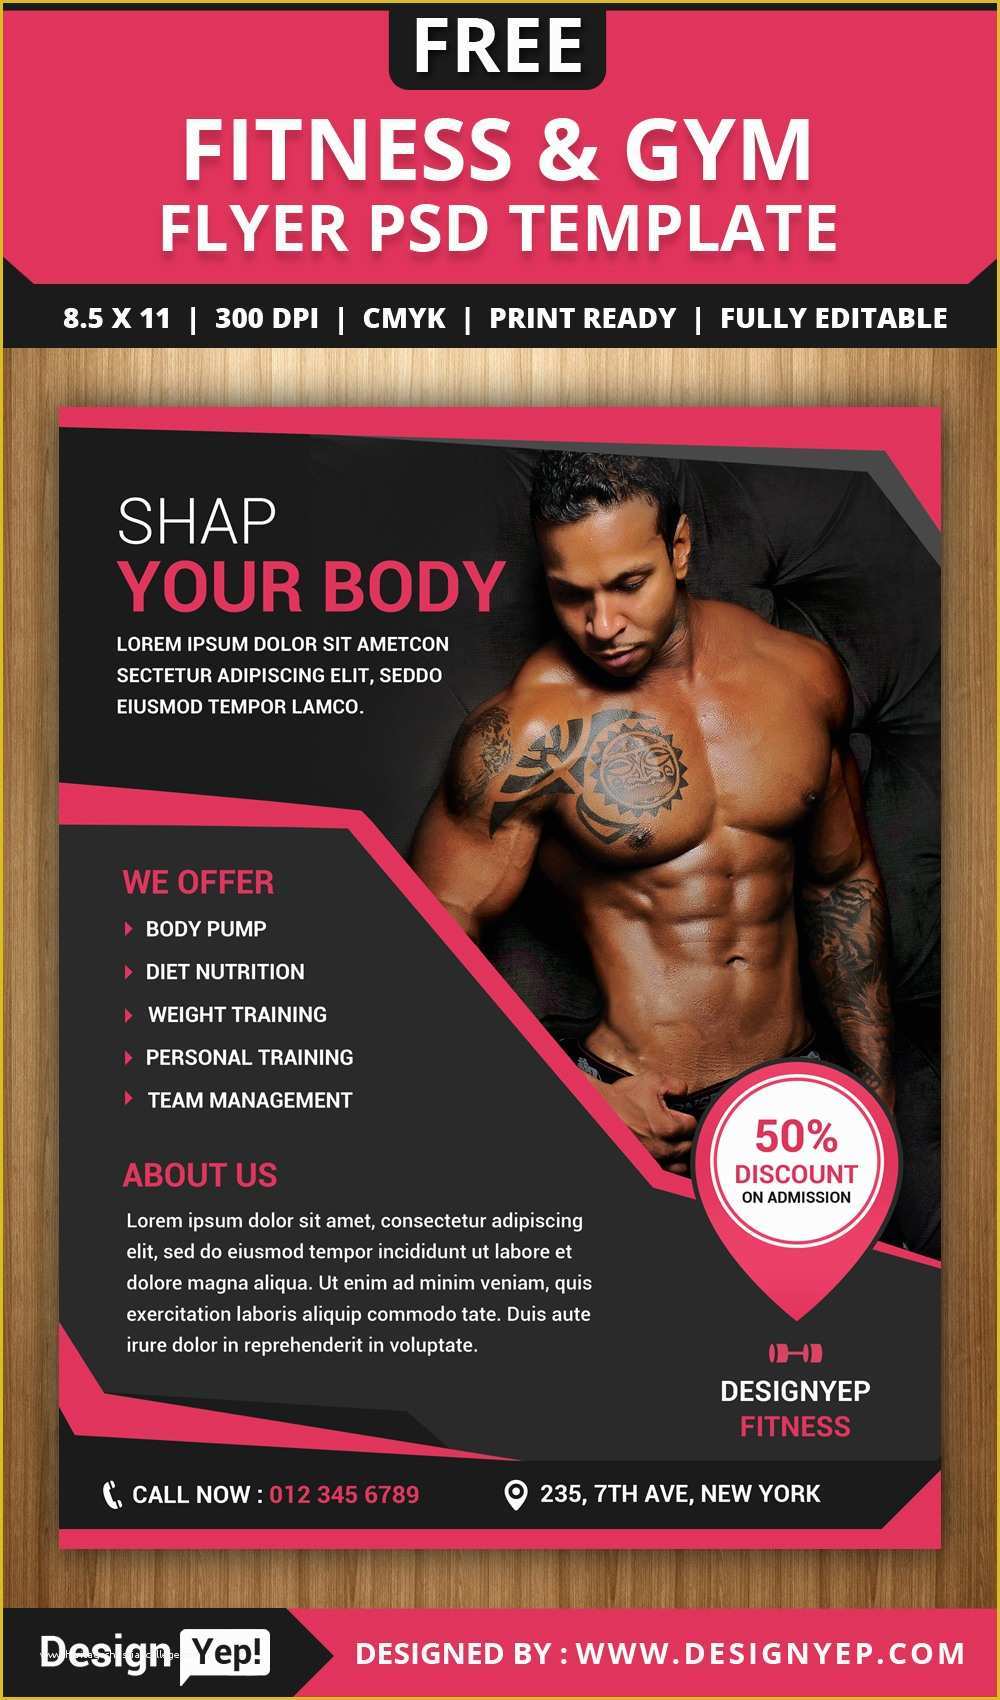 Fitness Poster Template Free Of Free Fitness and Gym Flyer Psd Template Designyep